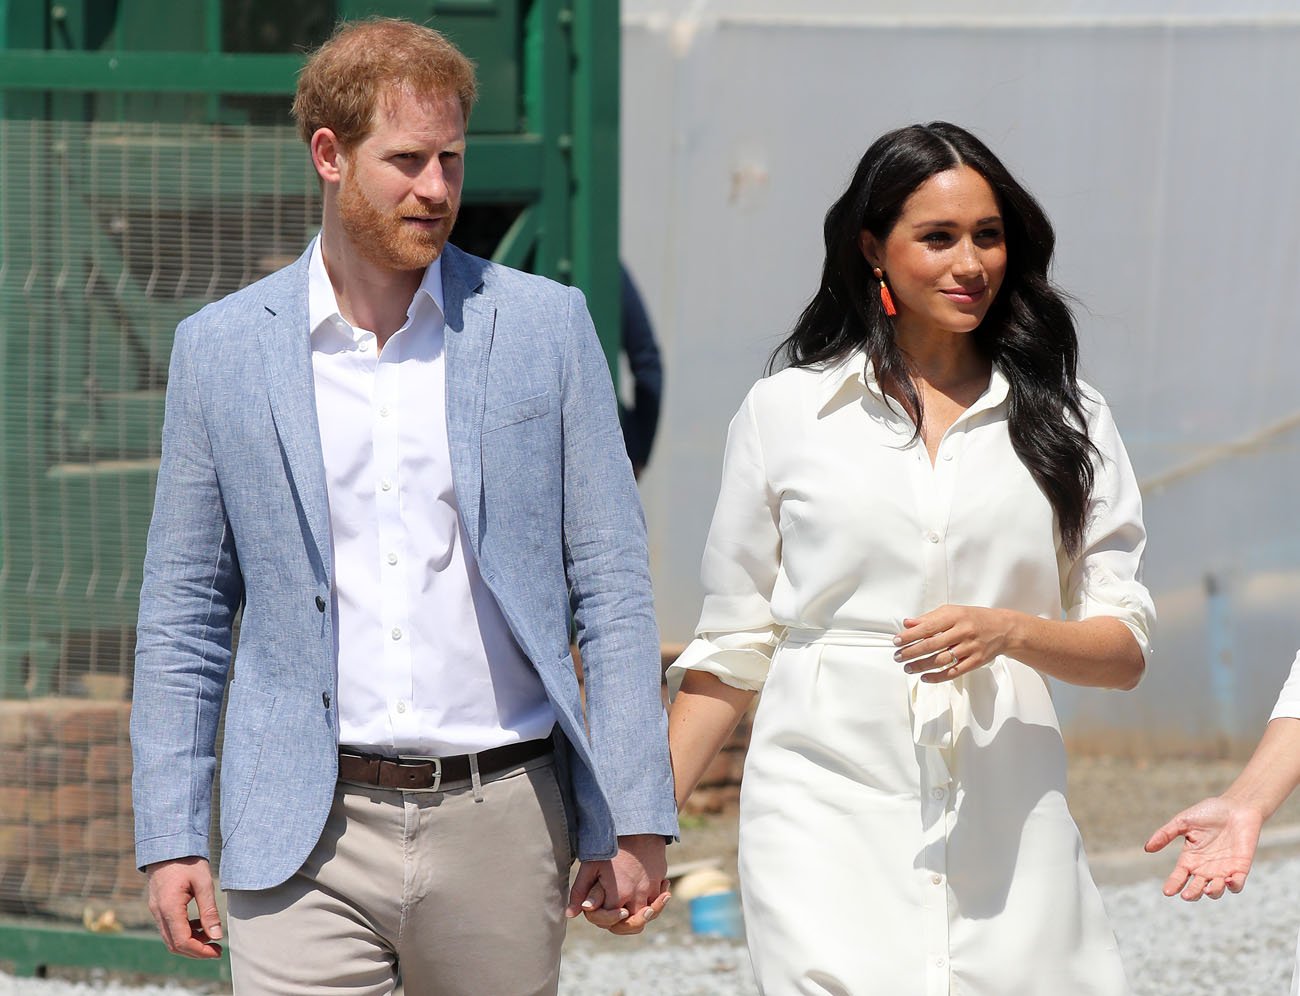 Prince Harry and Meghan Markle walking together, holding hands